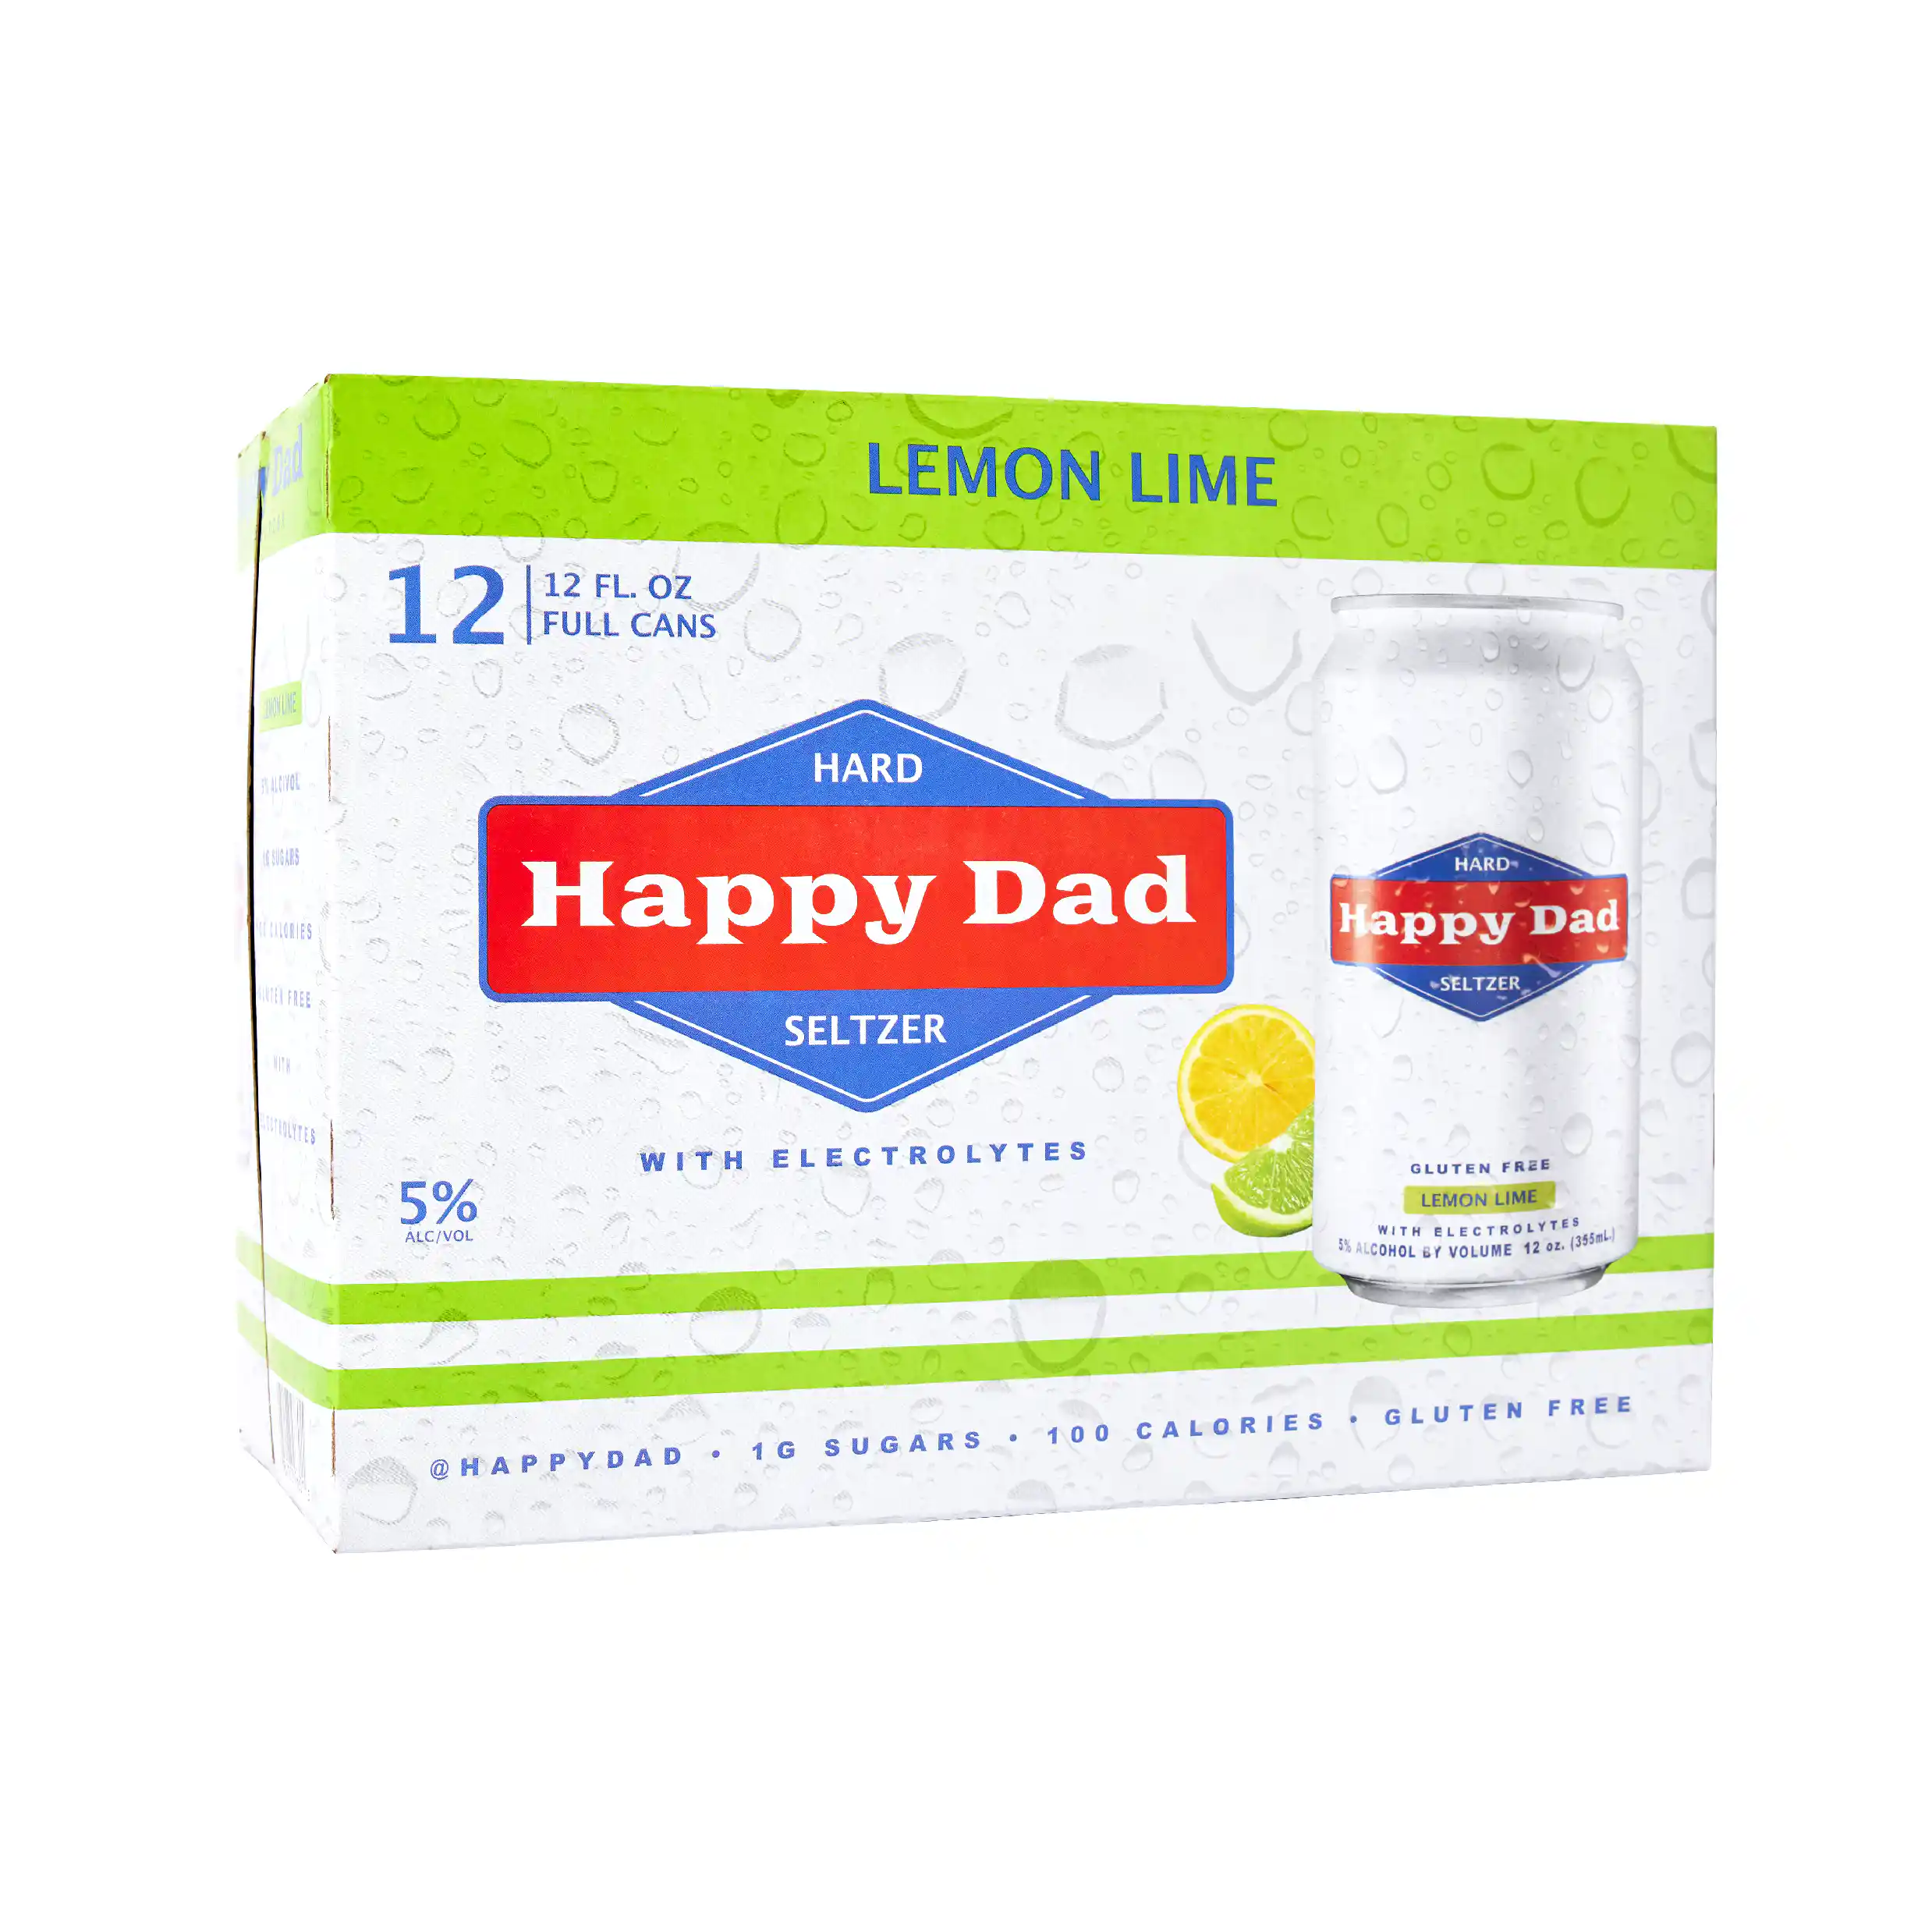 images/new_beer/Happy Dad Lime Seltzer.png